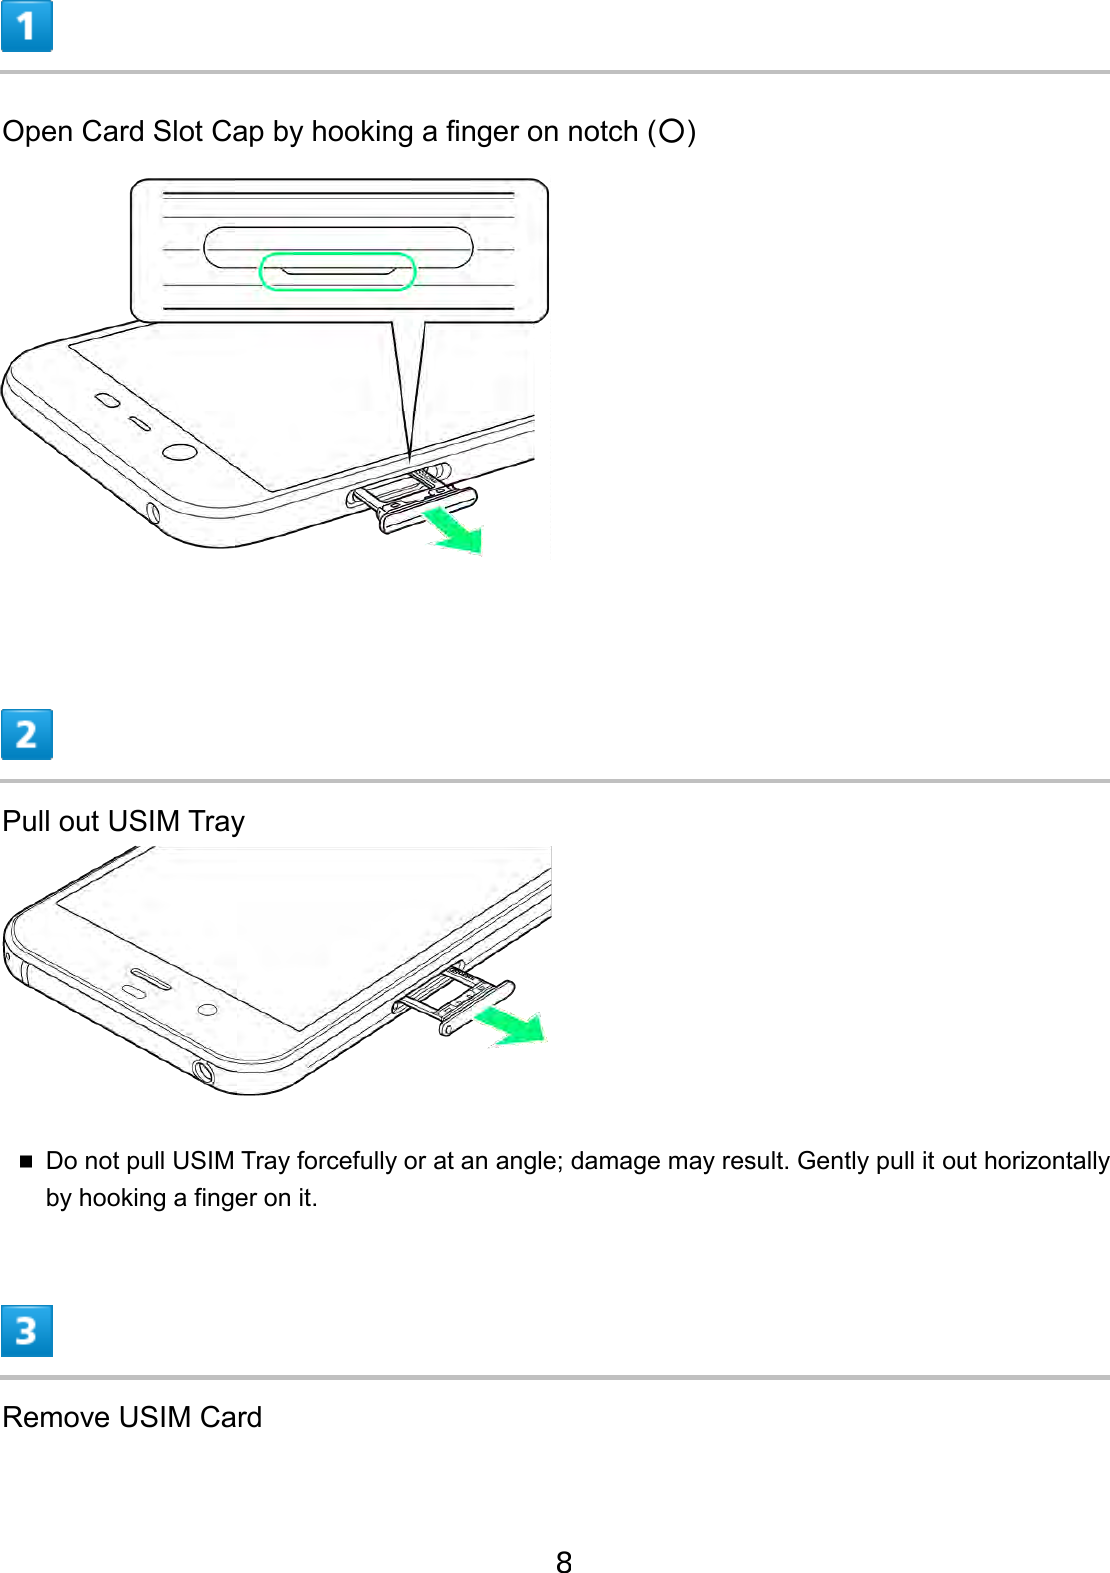 Open Card Slot Cap by hooking a finger on notch (○) Pull out USIM Tray Do not pull USIM Tray forcefully or at an angle; damage may result. Gently pull it out horizontallyby hooking a finger on it. Remove USIM Card 8